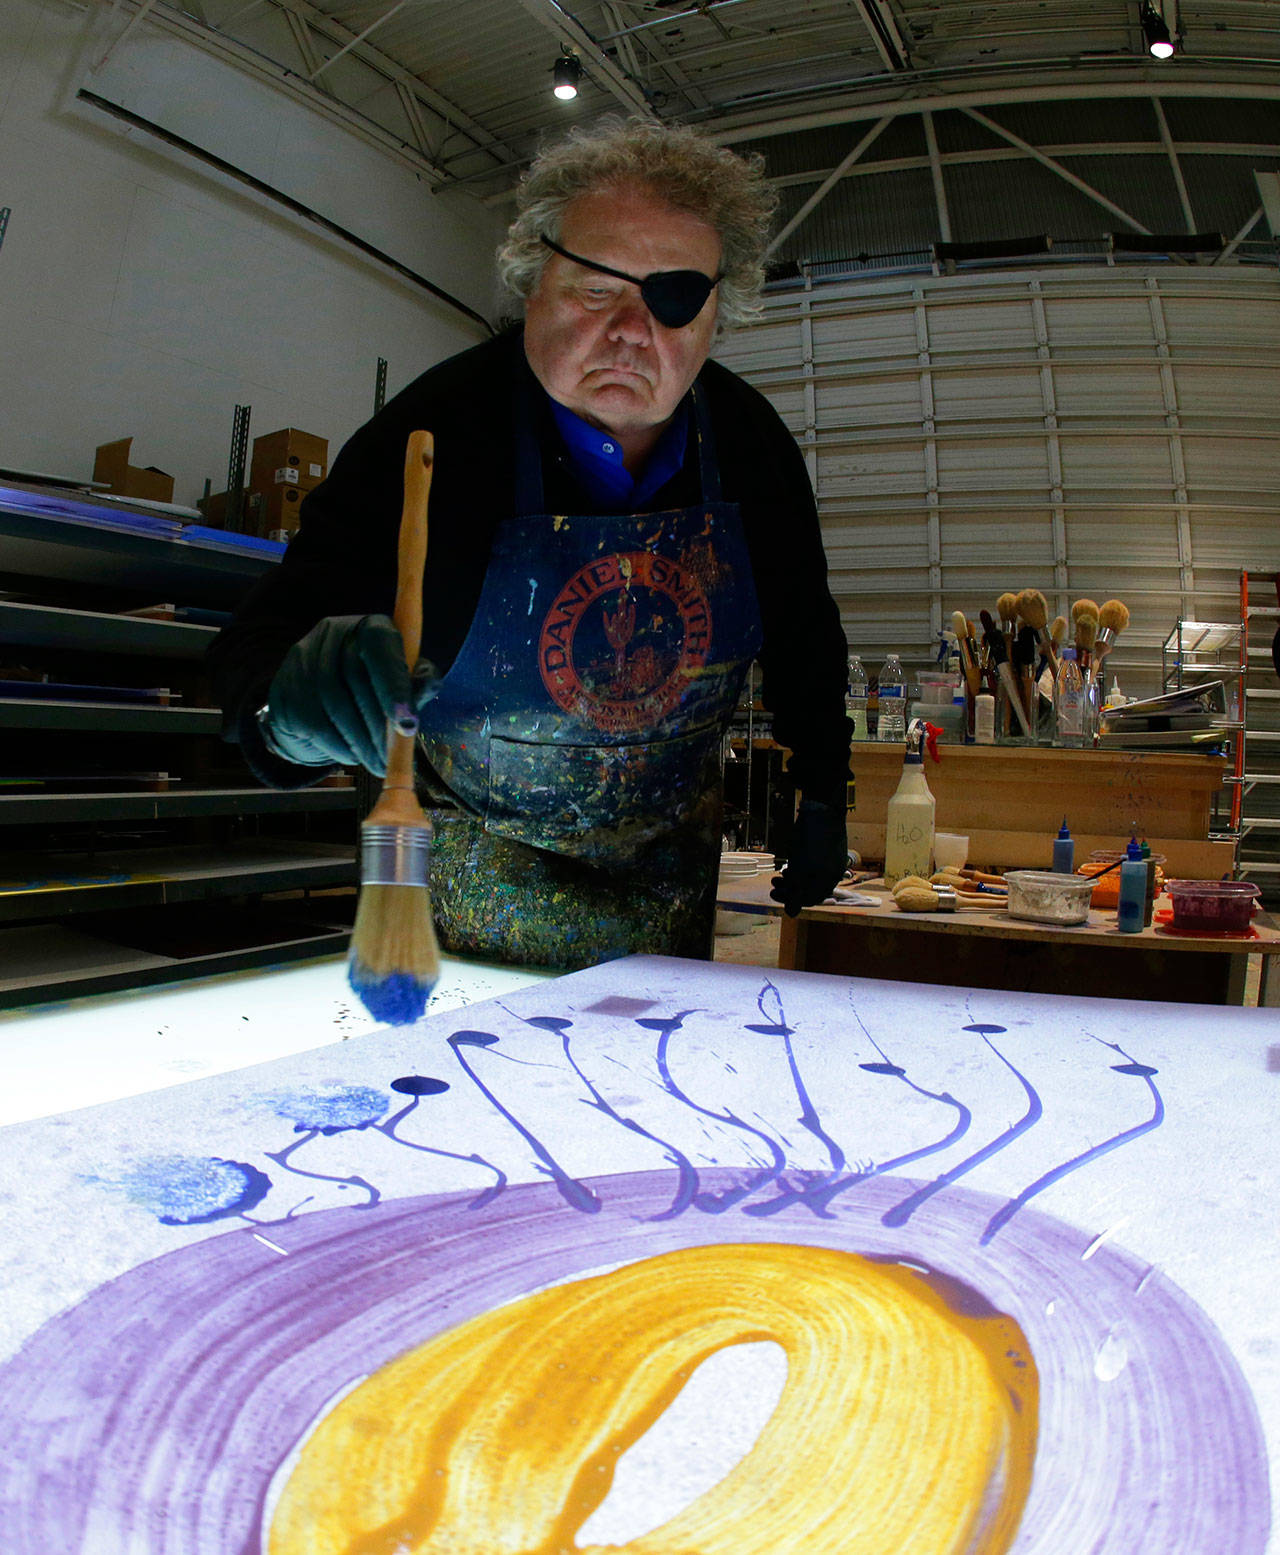 Glass artist Dale Chihuly works on a piece titled “Glass on Glass” in one of his studios in Seattle in March. (Ted S. Warren/The Associated Press)